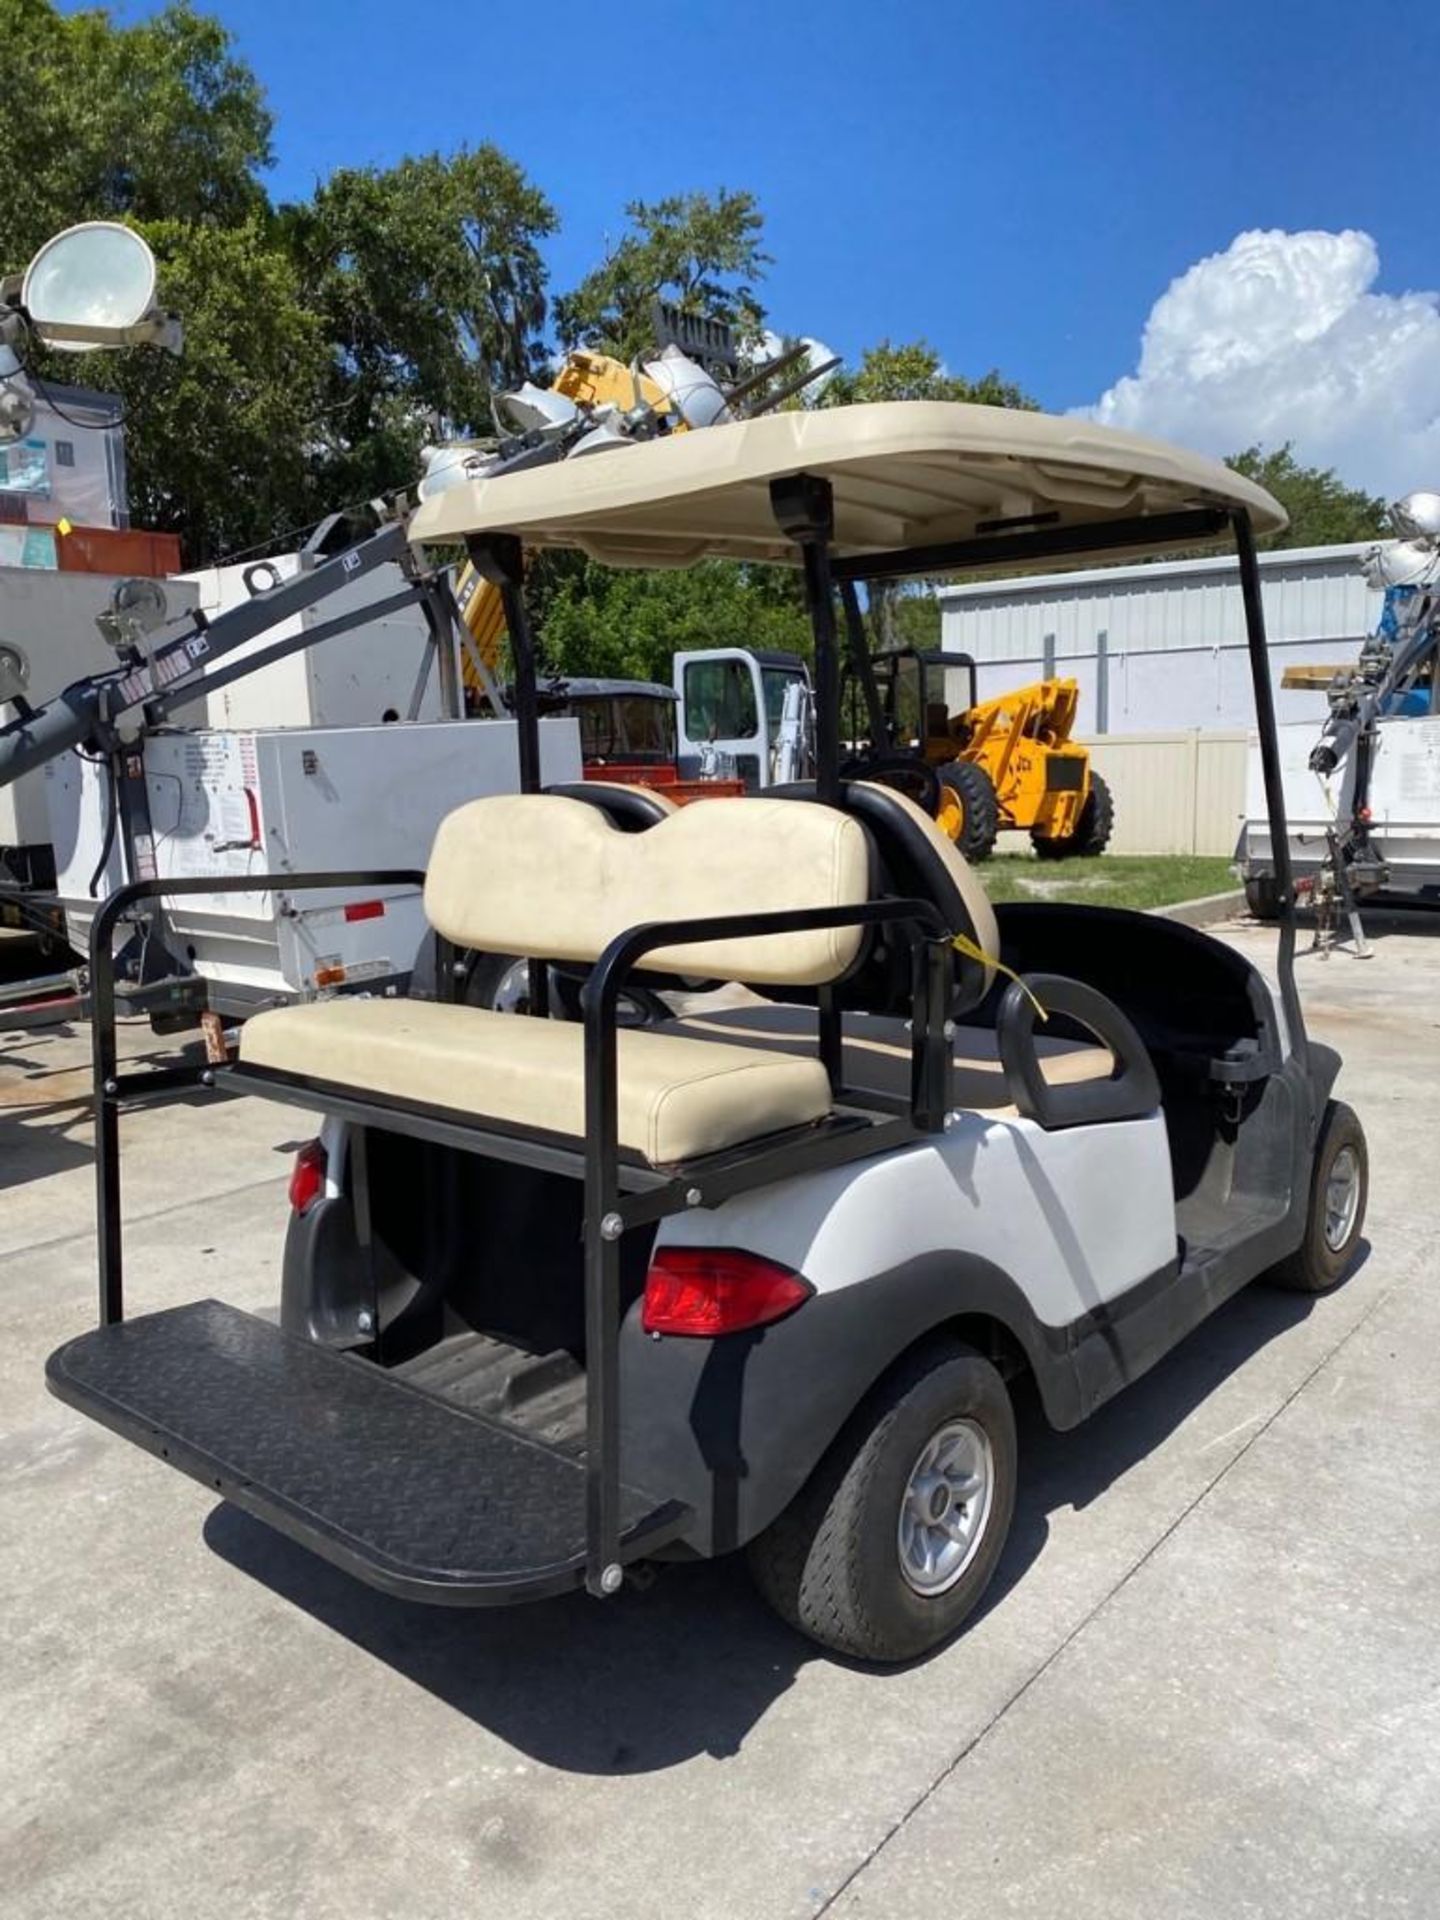 CLUB CAR ELECTRIC 4-SEATER GOLF CART, BATTERY CHARGER INCLUDED - Image 2 of 16